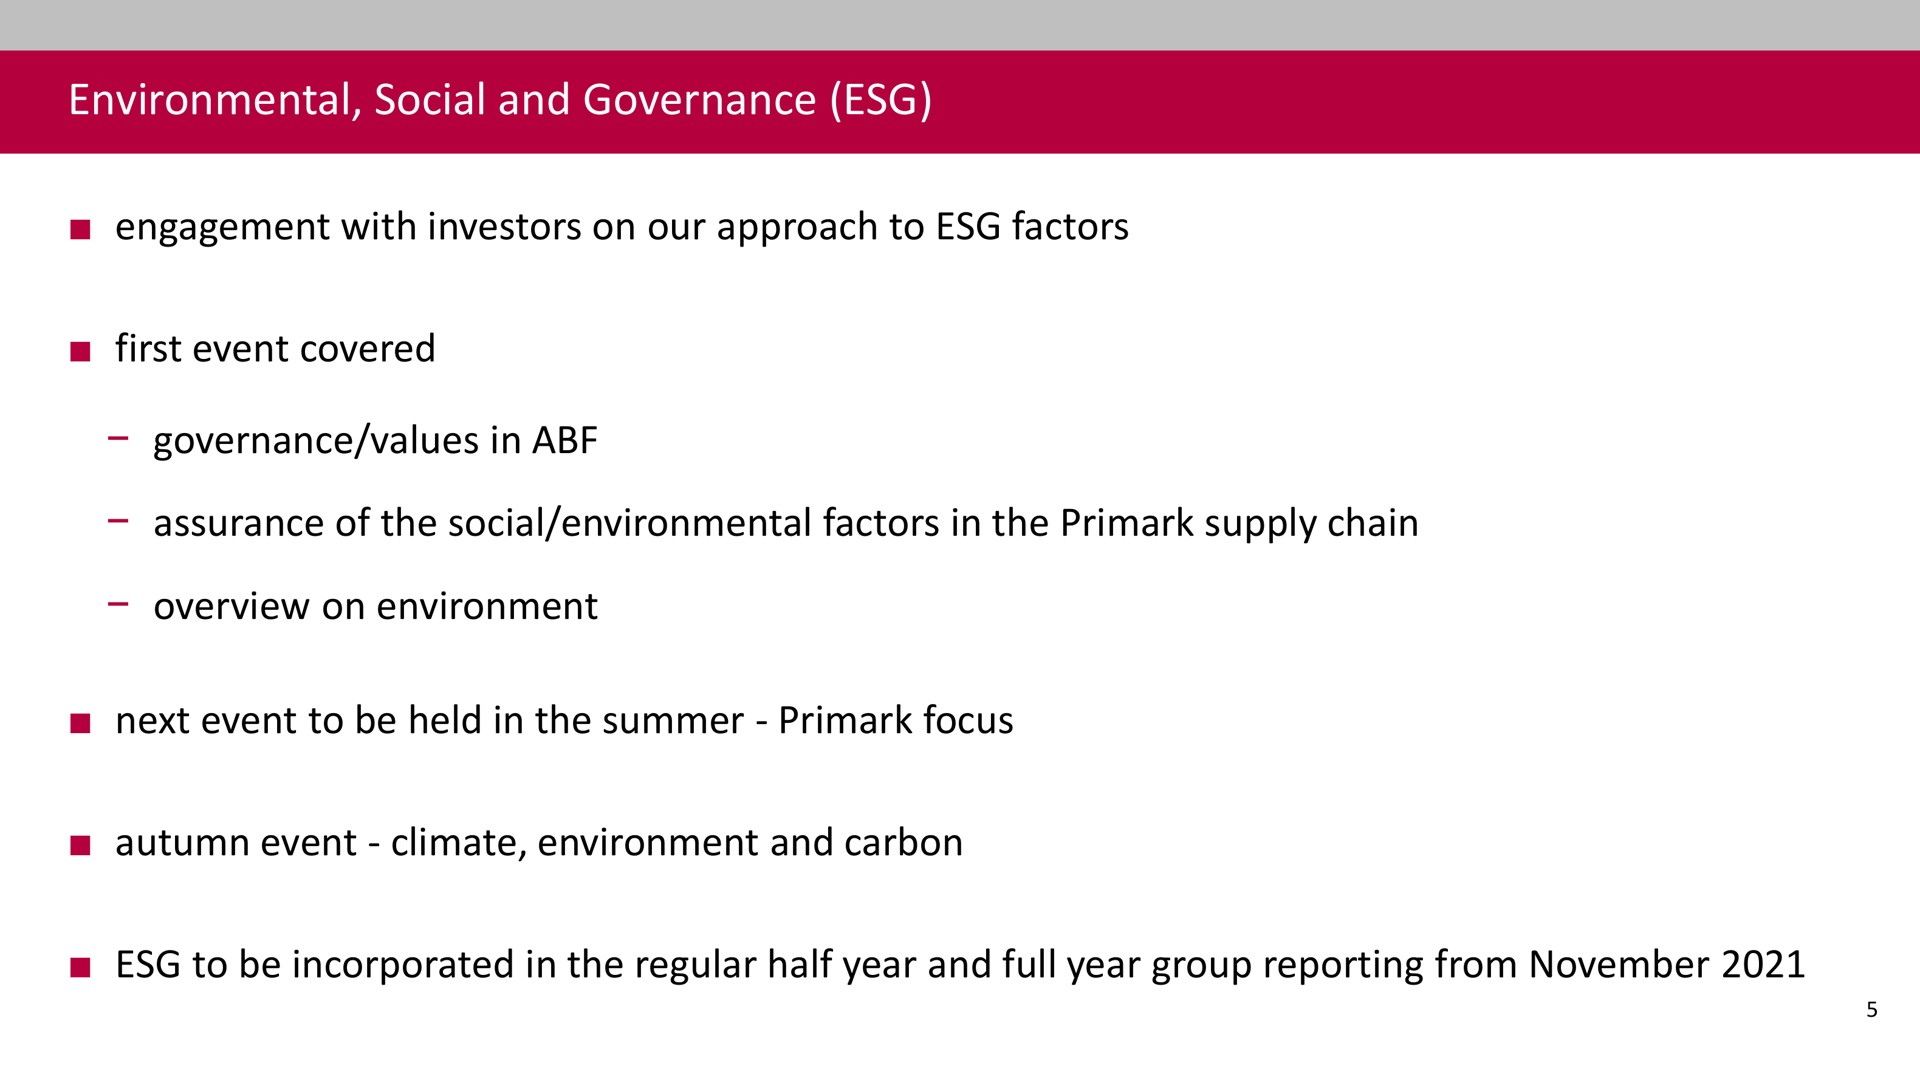 environmental social and governance engagement with investors on our approach to factors first event covered governance values in assurance of the social environmental factors in the supply chain overview on environment next event to be held in the summer focus autumn event climate environment and carbon to be incorporated in the regular half year and full year group reporting from | Associated British Foods